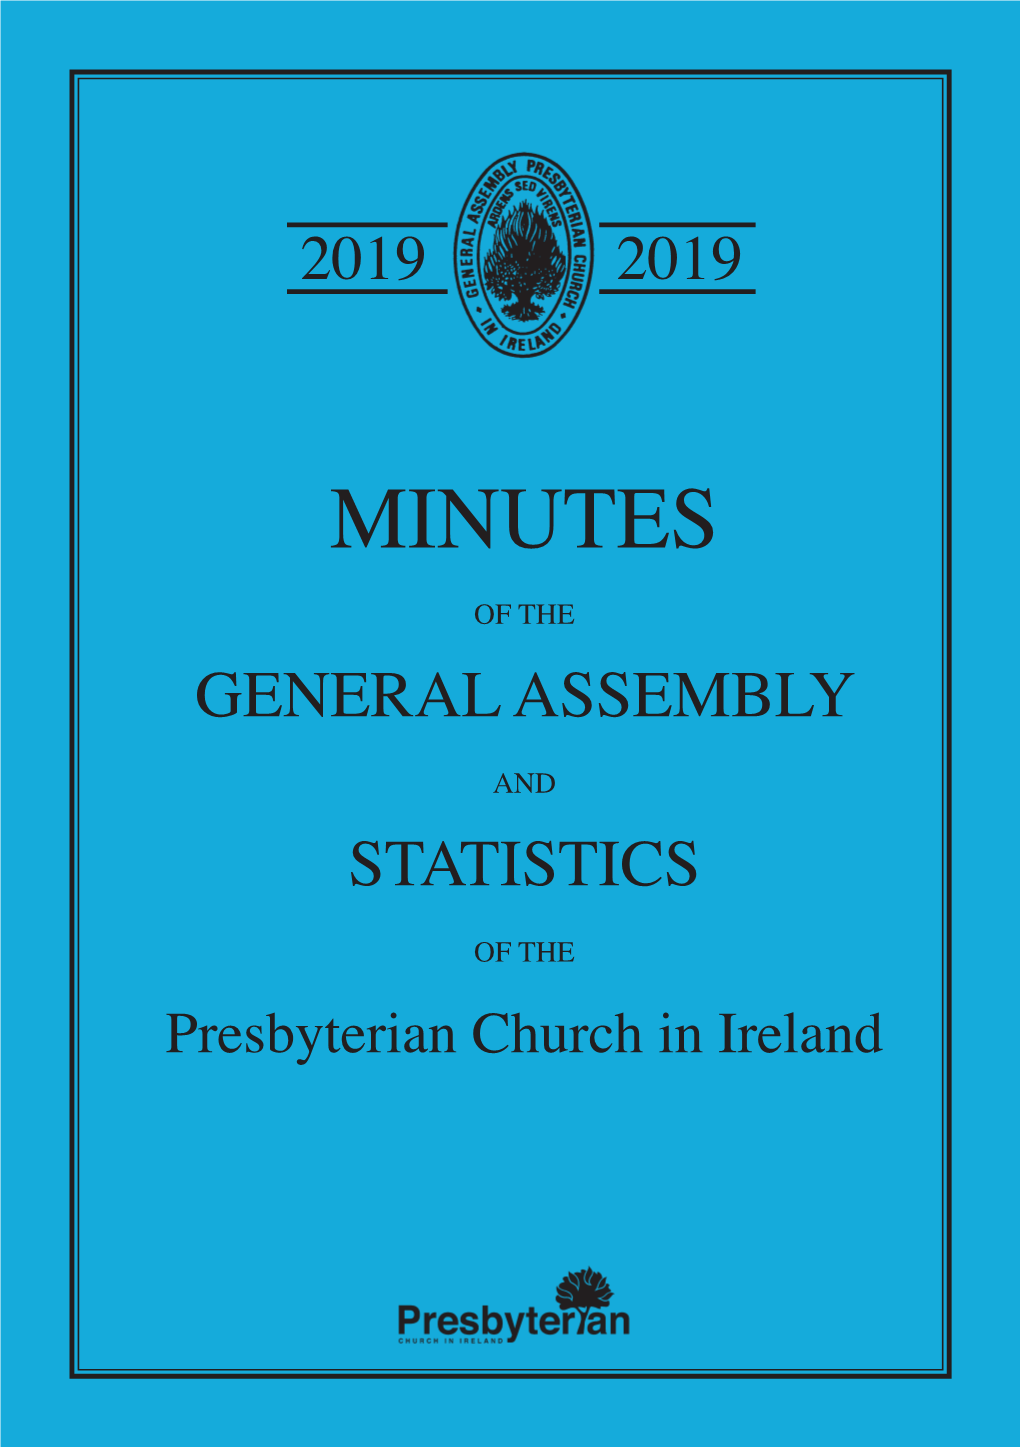 Minutes of the General Assembly 2019